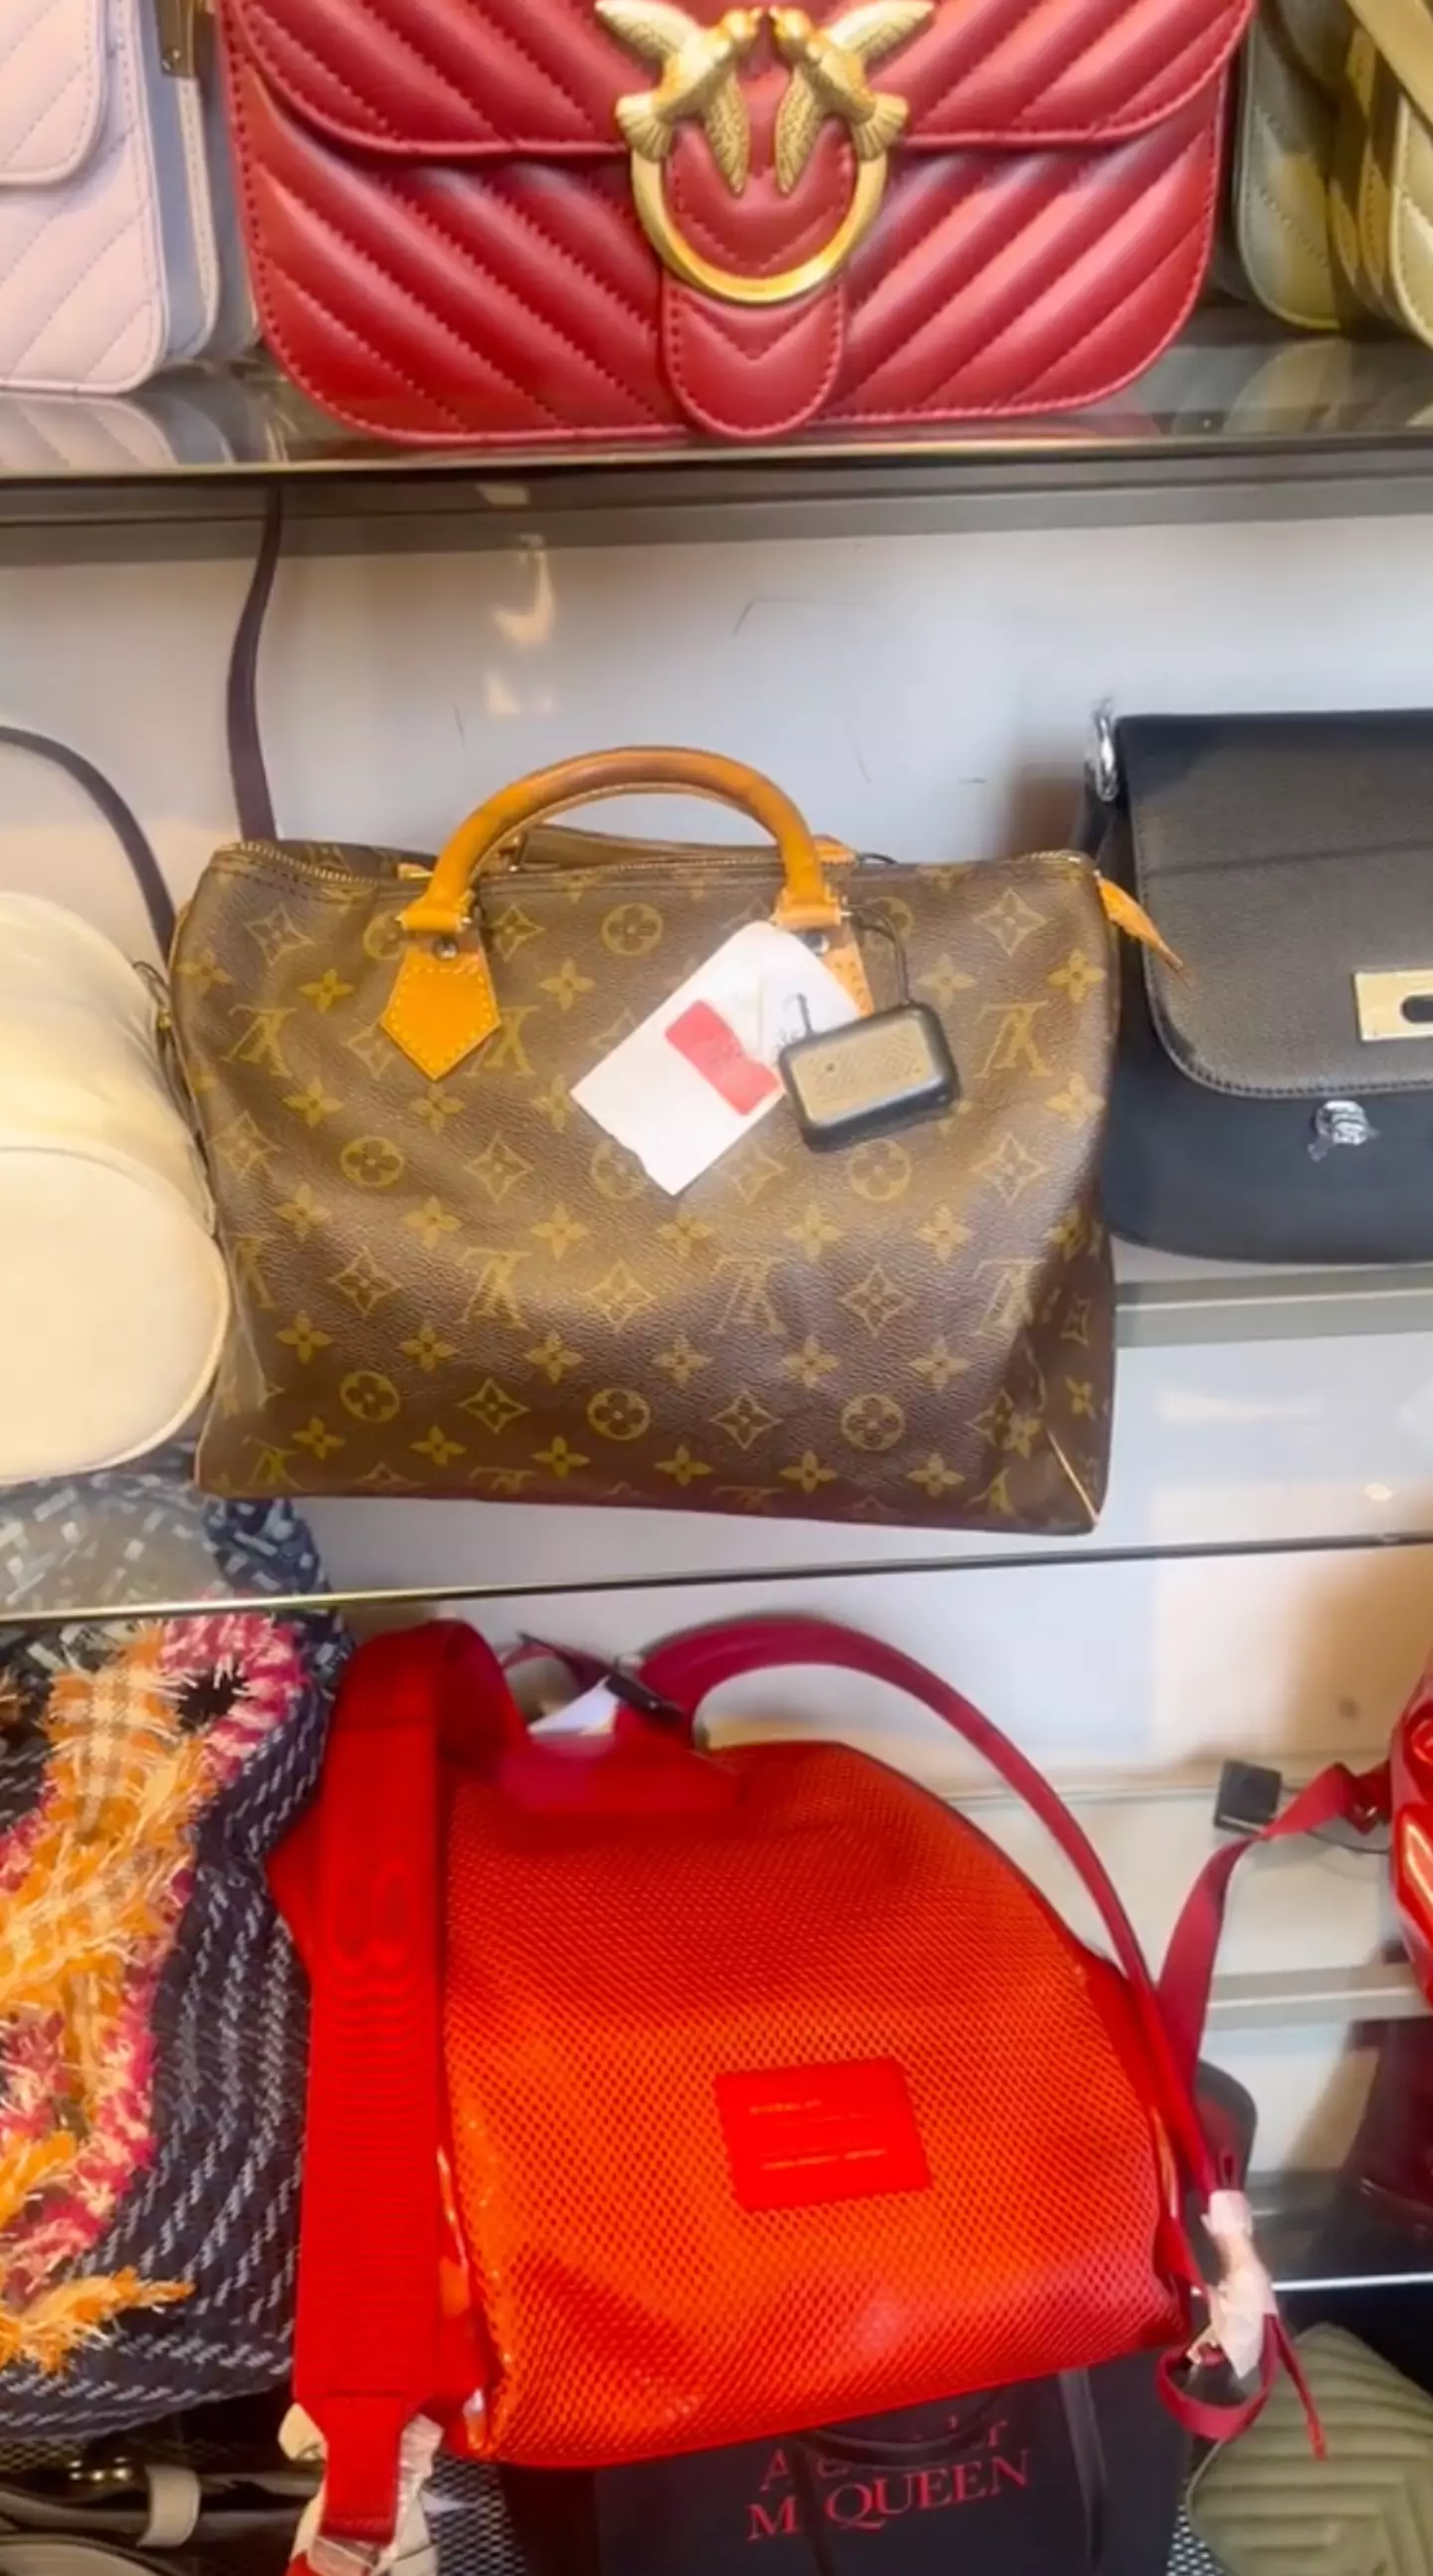 The Louis Vuitton Speedy 30 normally retails for a staggering £1, 100.